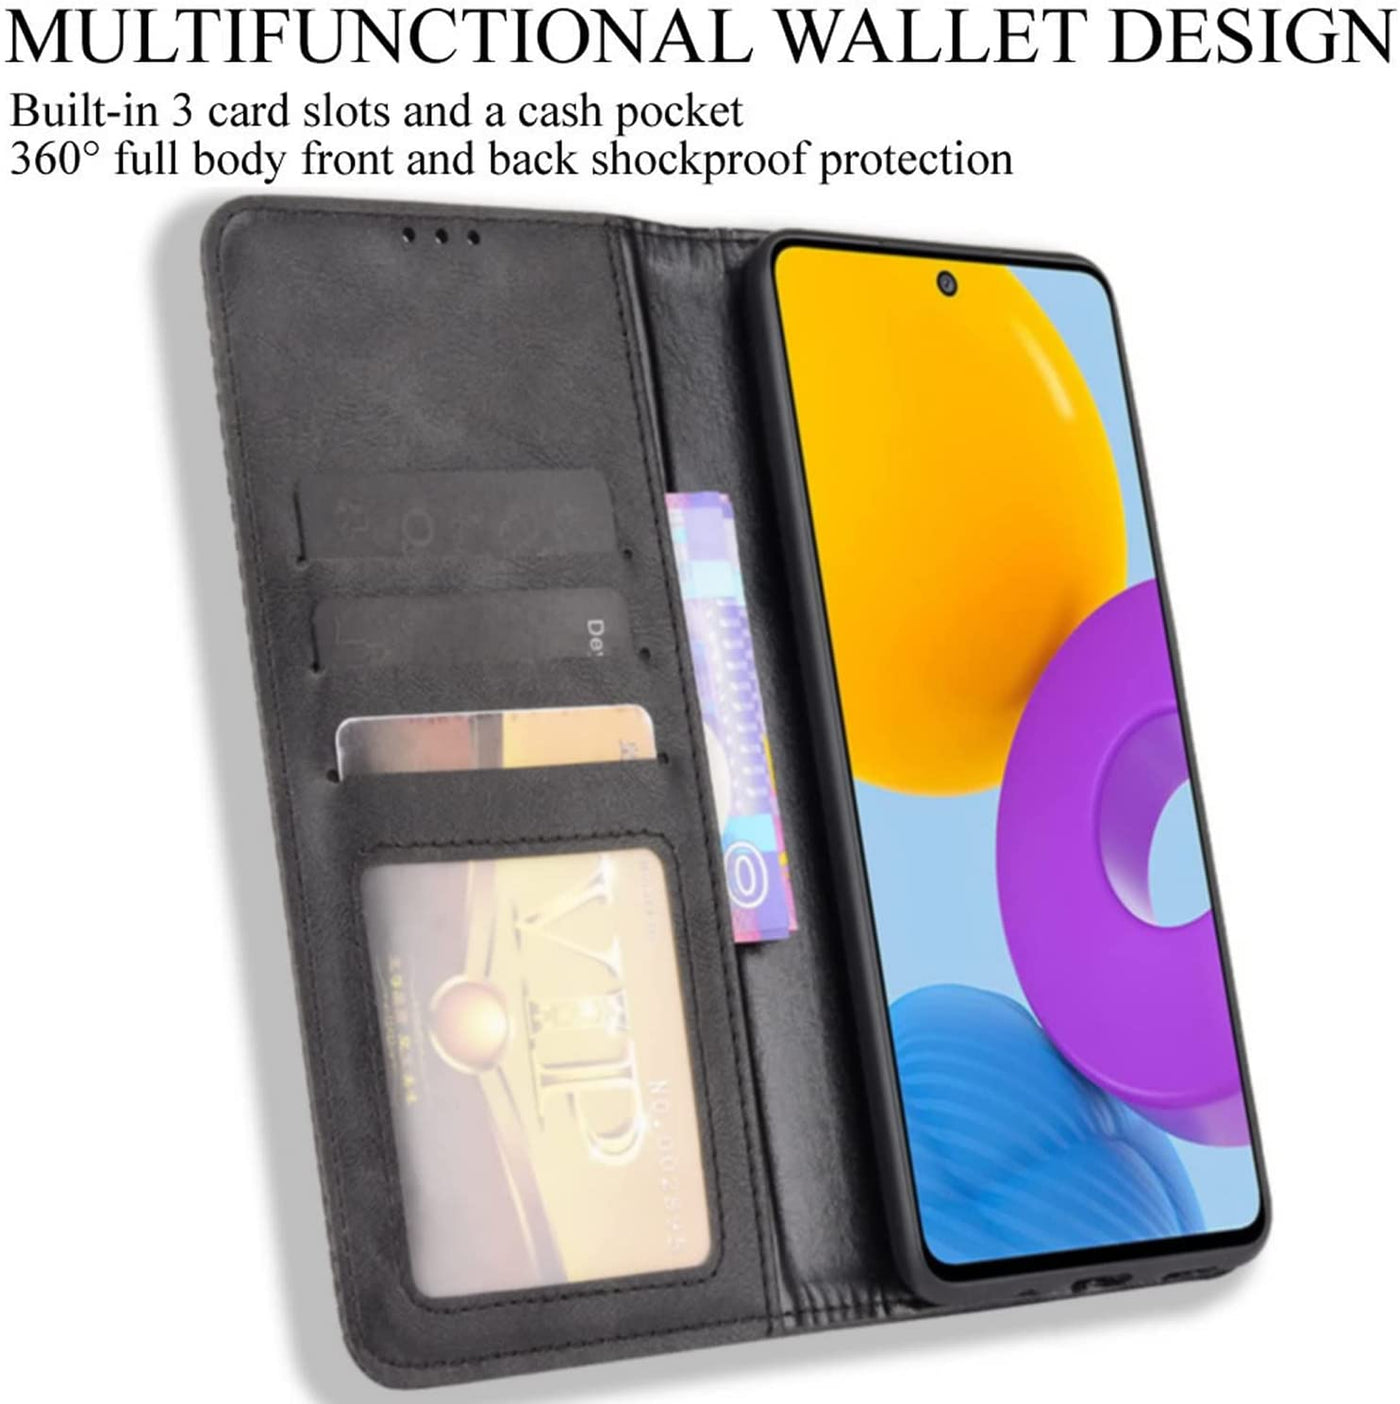 Samsung Galaxy M52 Leather Wallet flip case cover with card slots by Excelsior